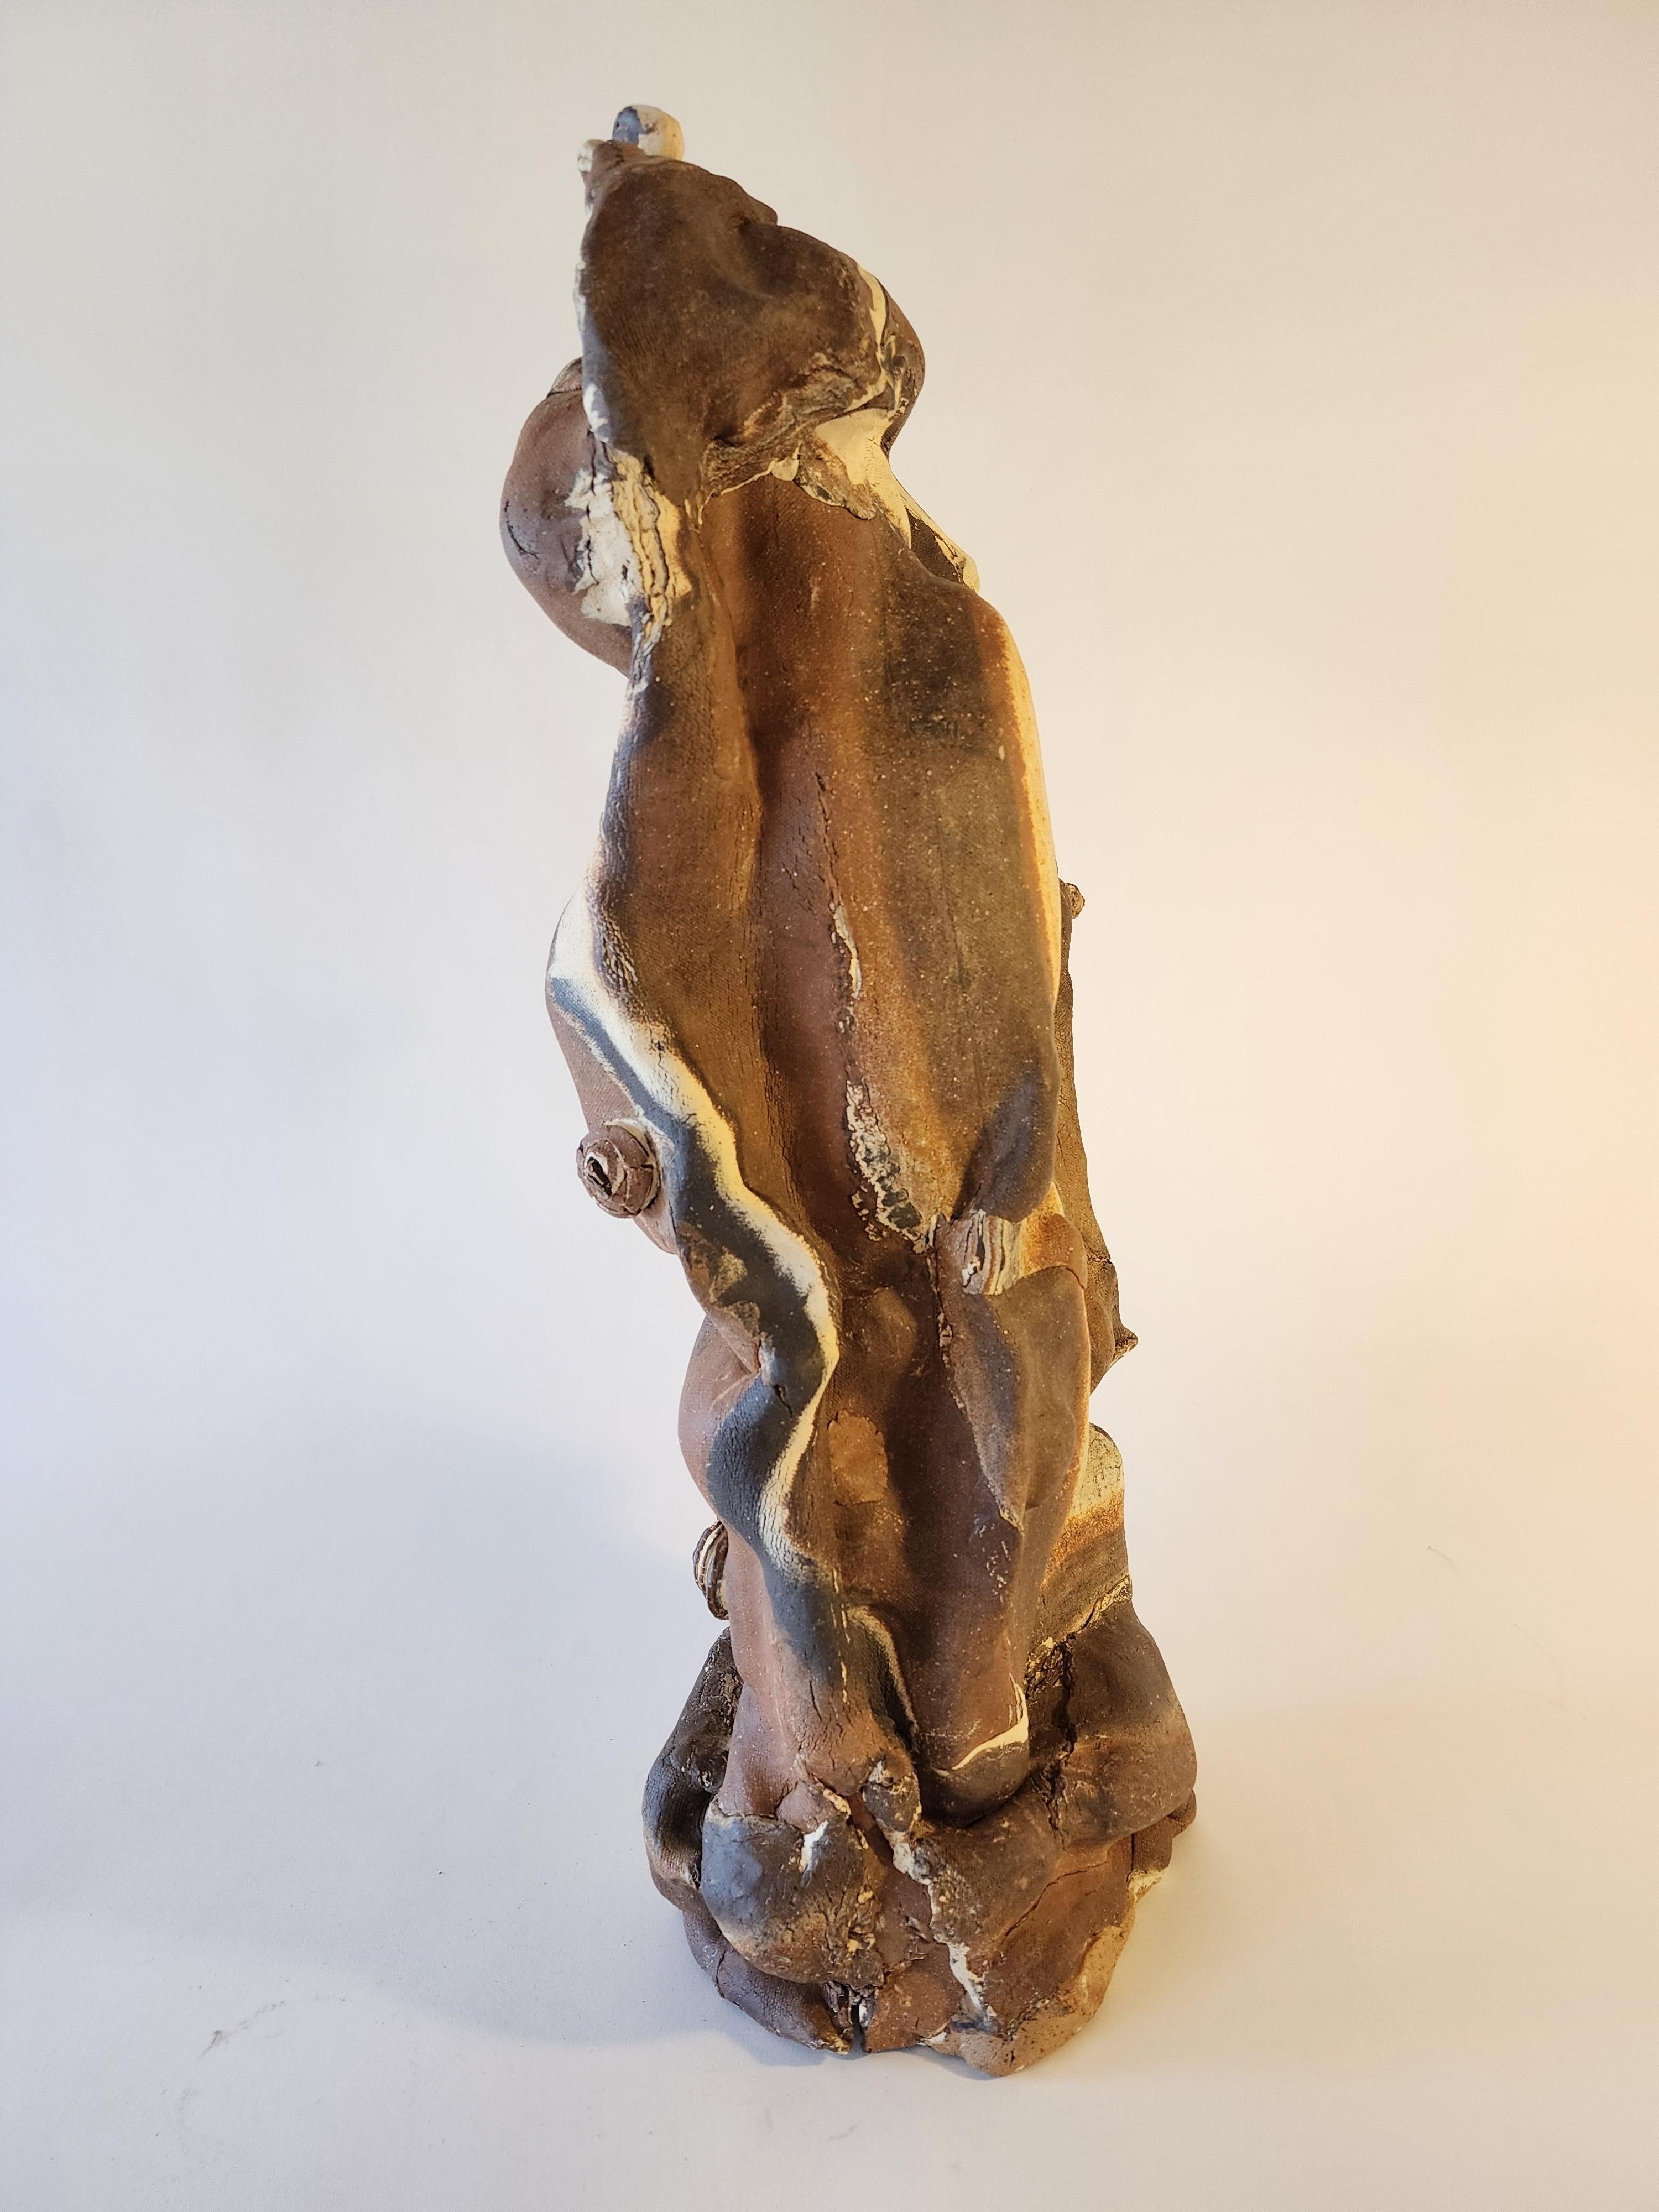 NOR Cliff dwelling - Abstract Expressionist Sculpture by Anna Bush Crews